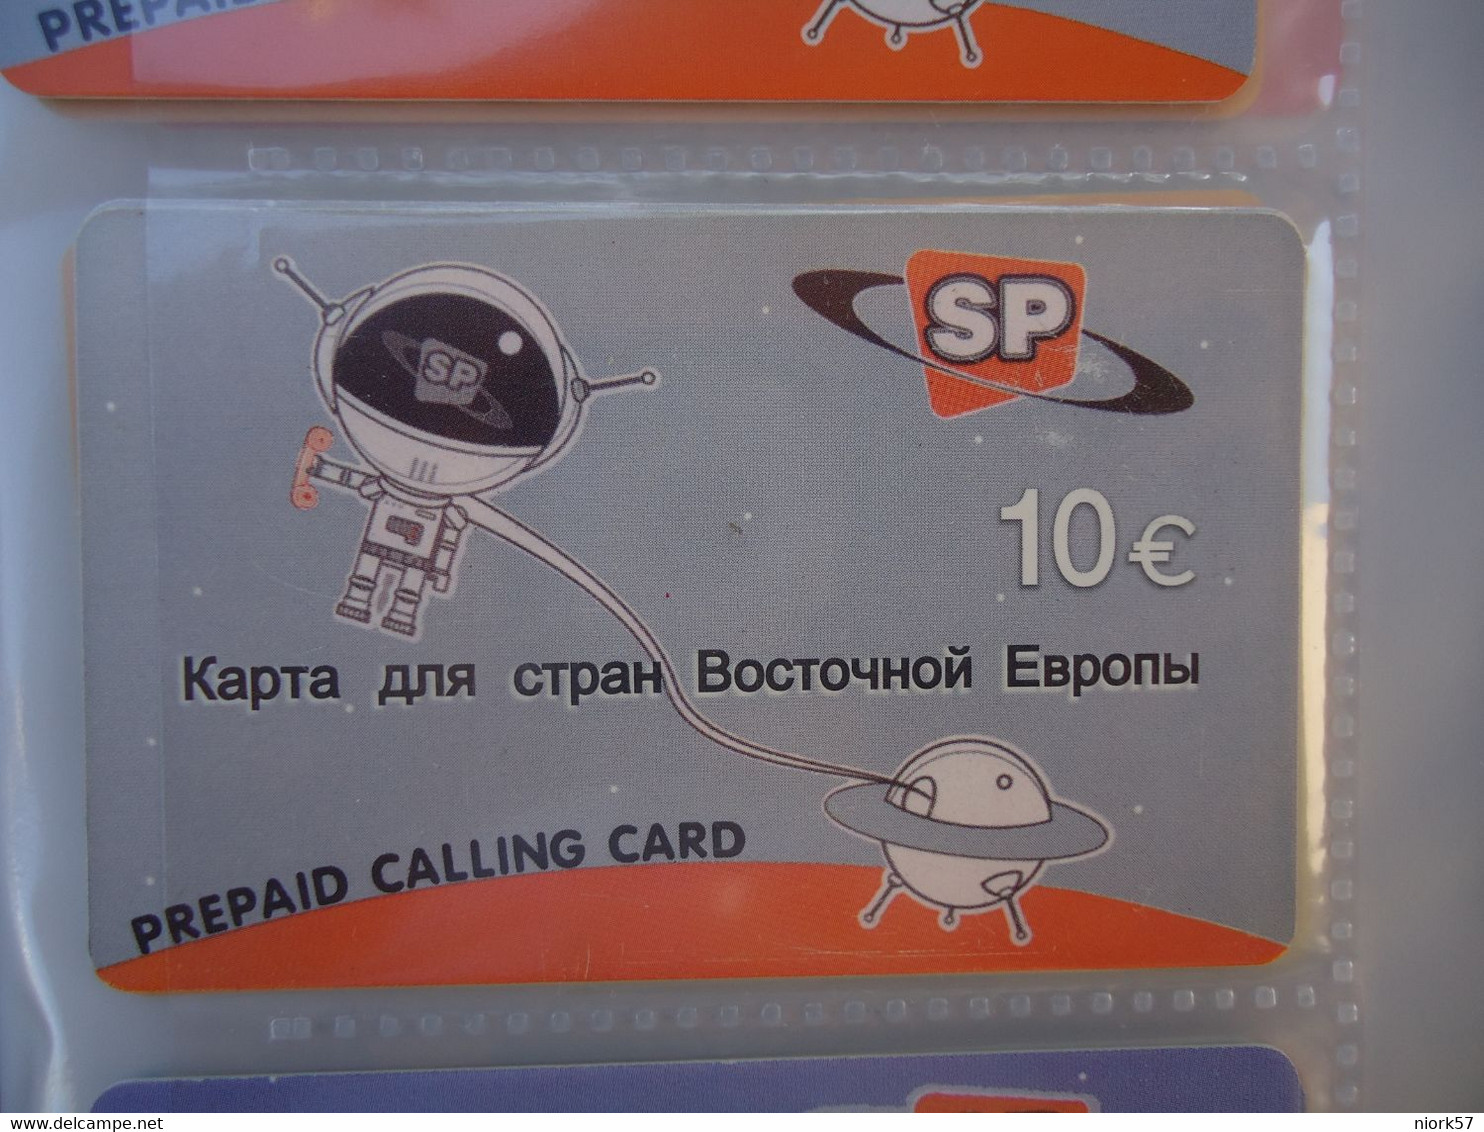 GREECE USED OLD  PREPAID  CARDS SP SPACE RUSSIA FROM MY COLLECTION - Ruimtevaart